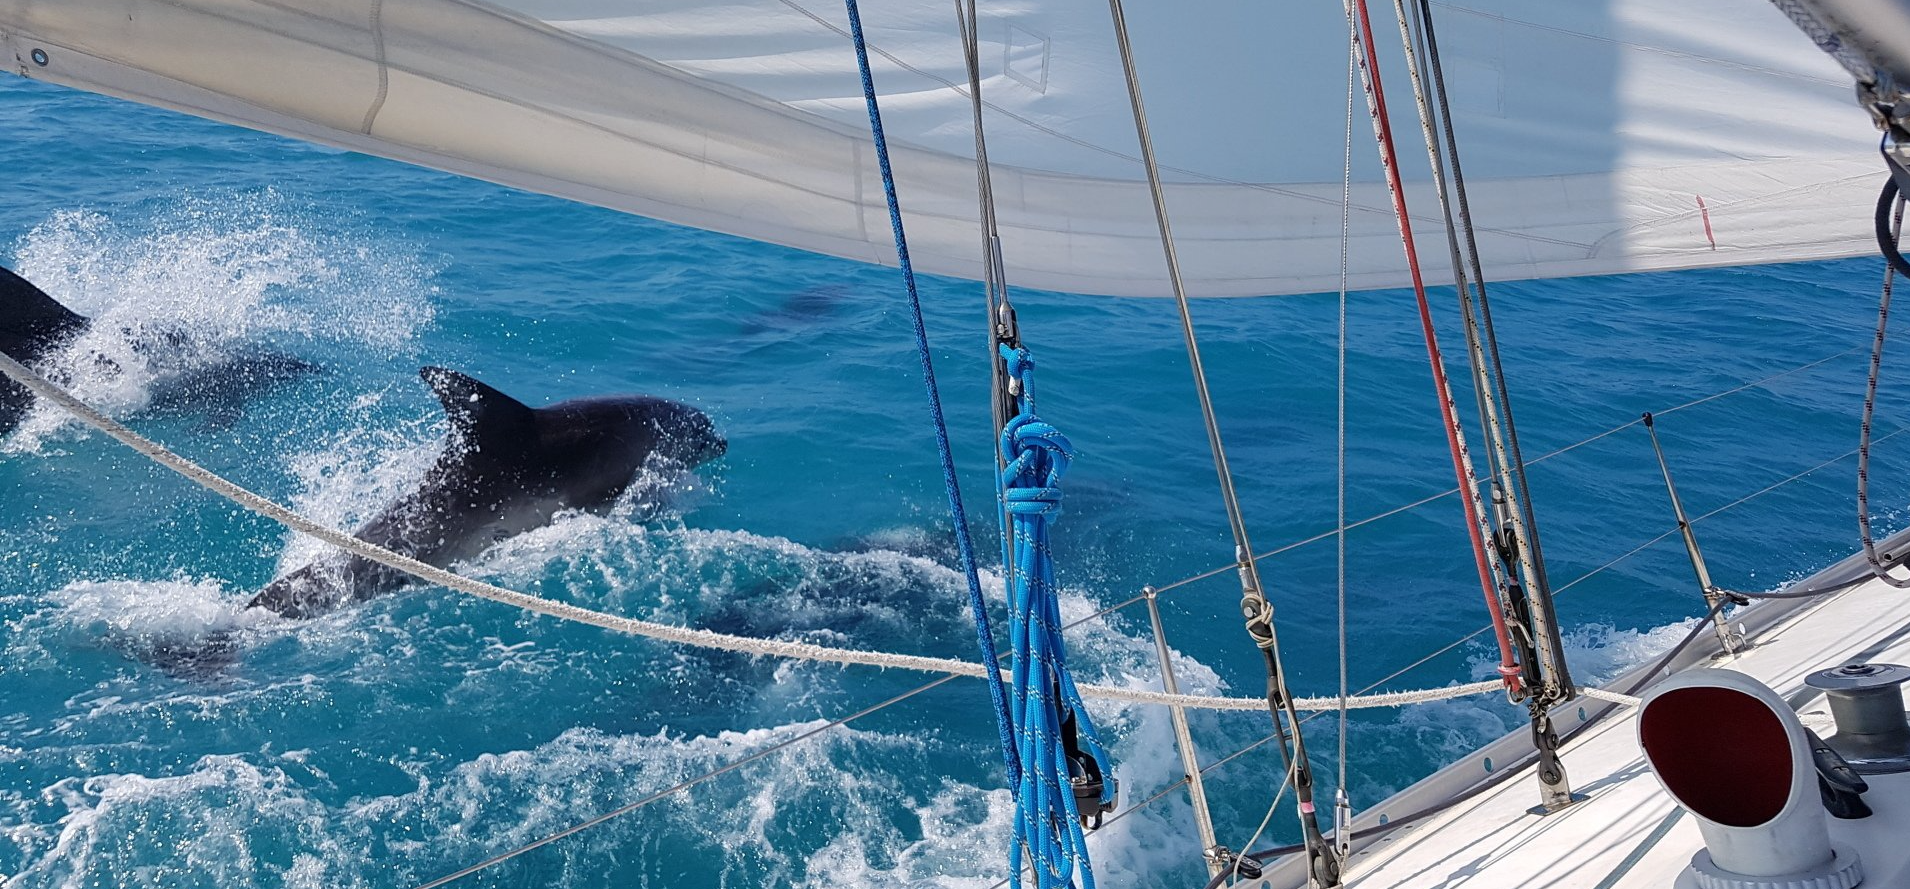 A picture taken from the deck of an underway yacht, looking under the mainsail and over the gunwhale at a pod of dolphins who are surfing in the wake next to the boat.